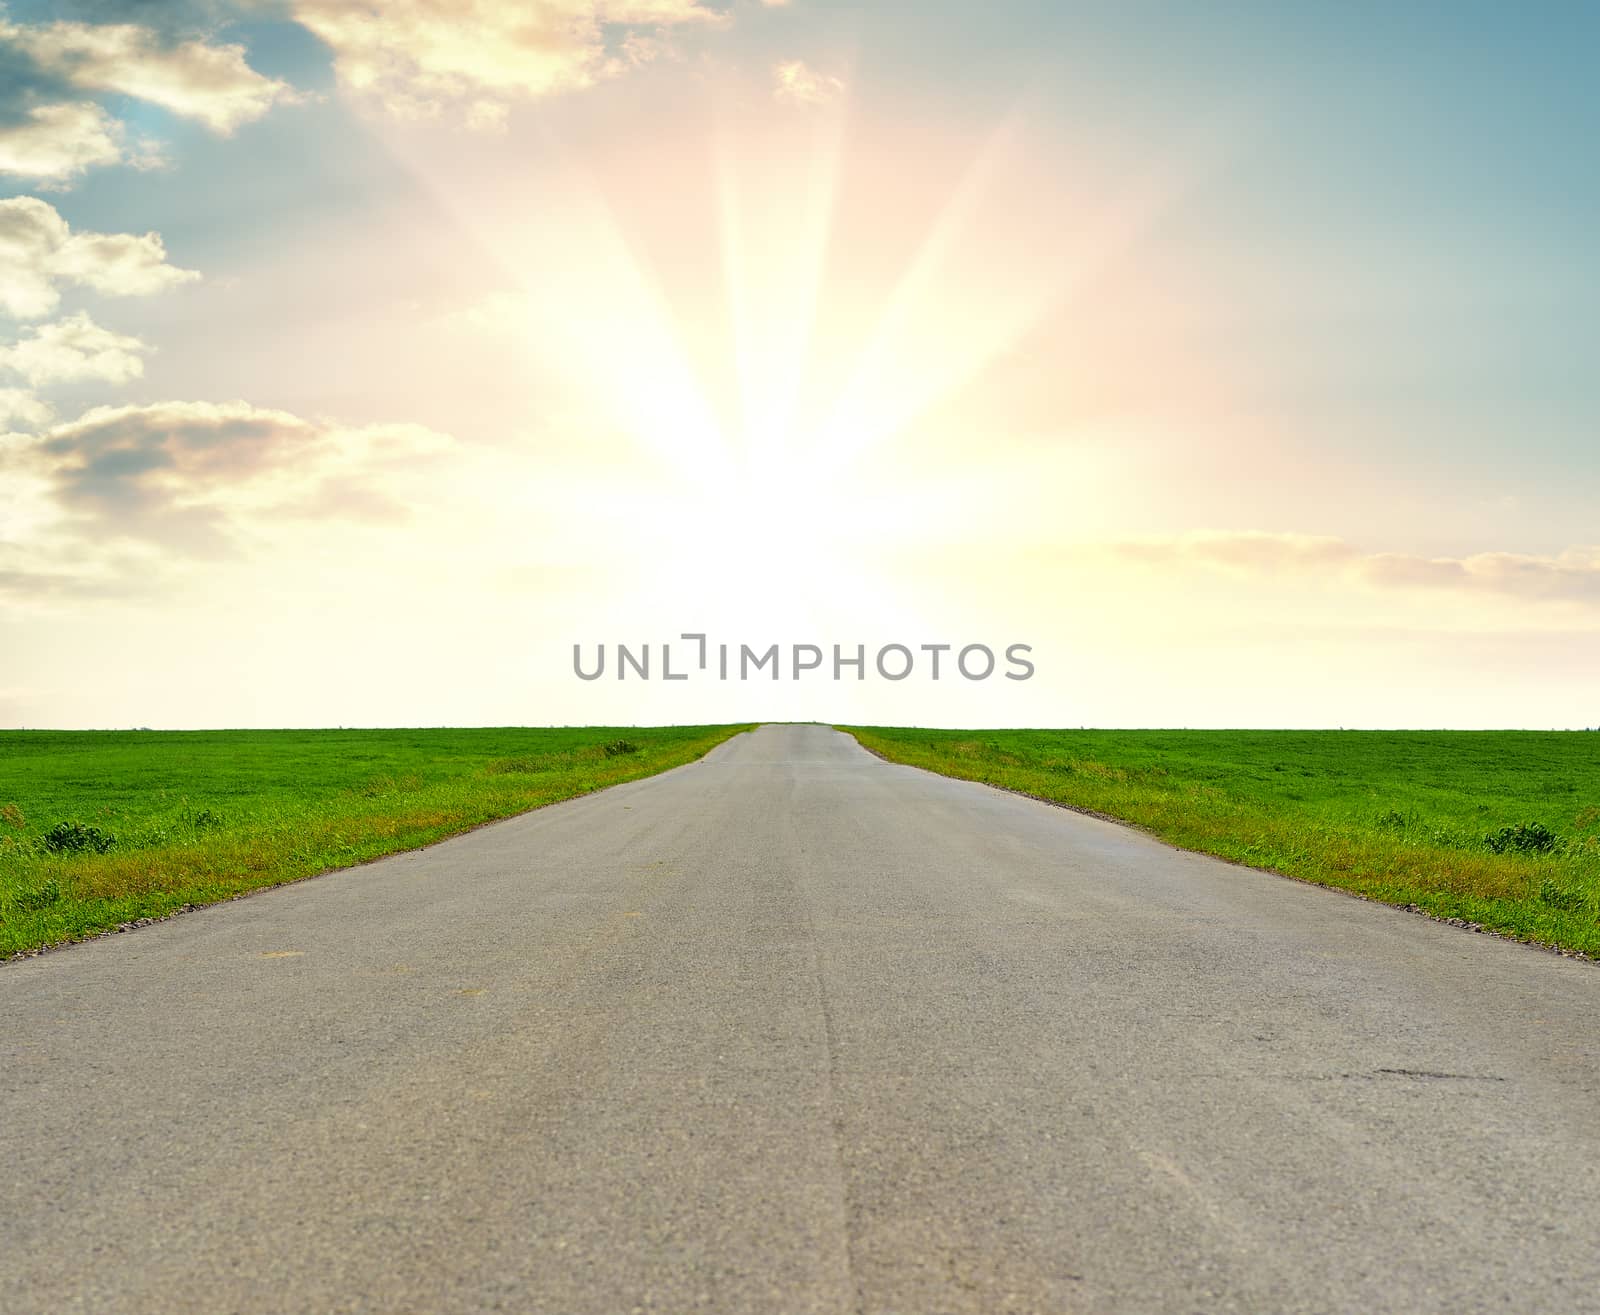 Asphalt road in a grass field against a beautiful sunrise. The concept of success